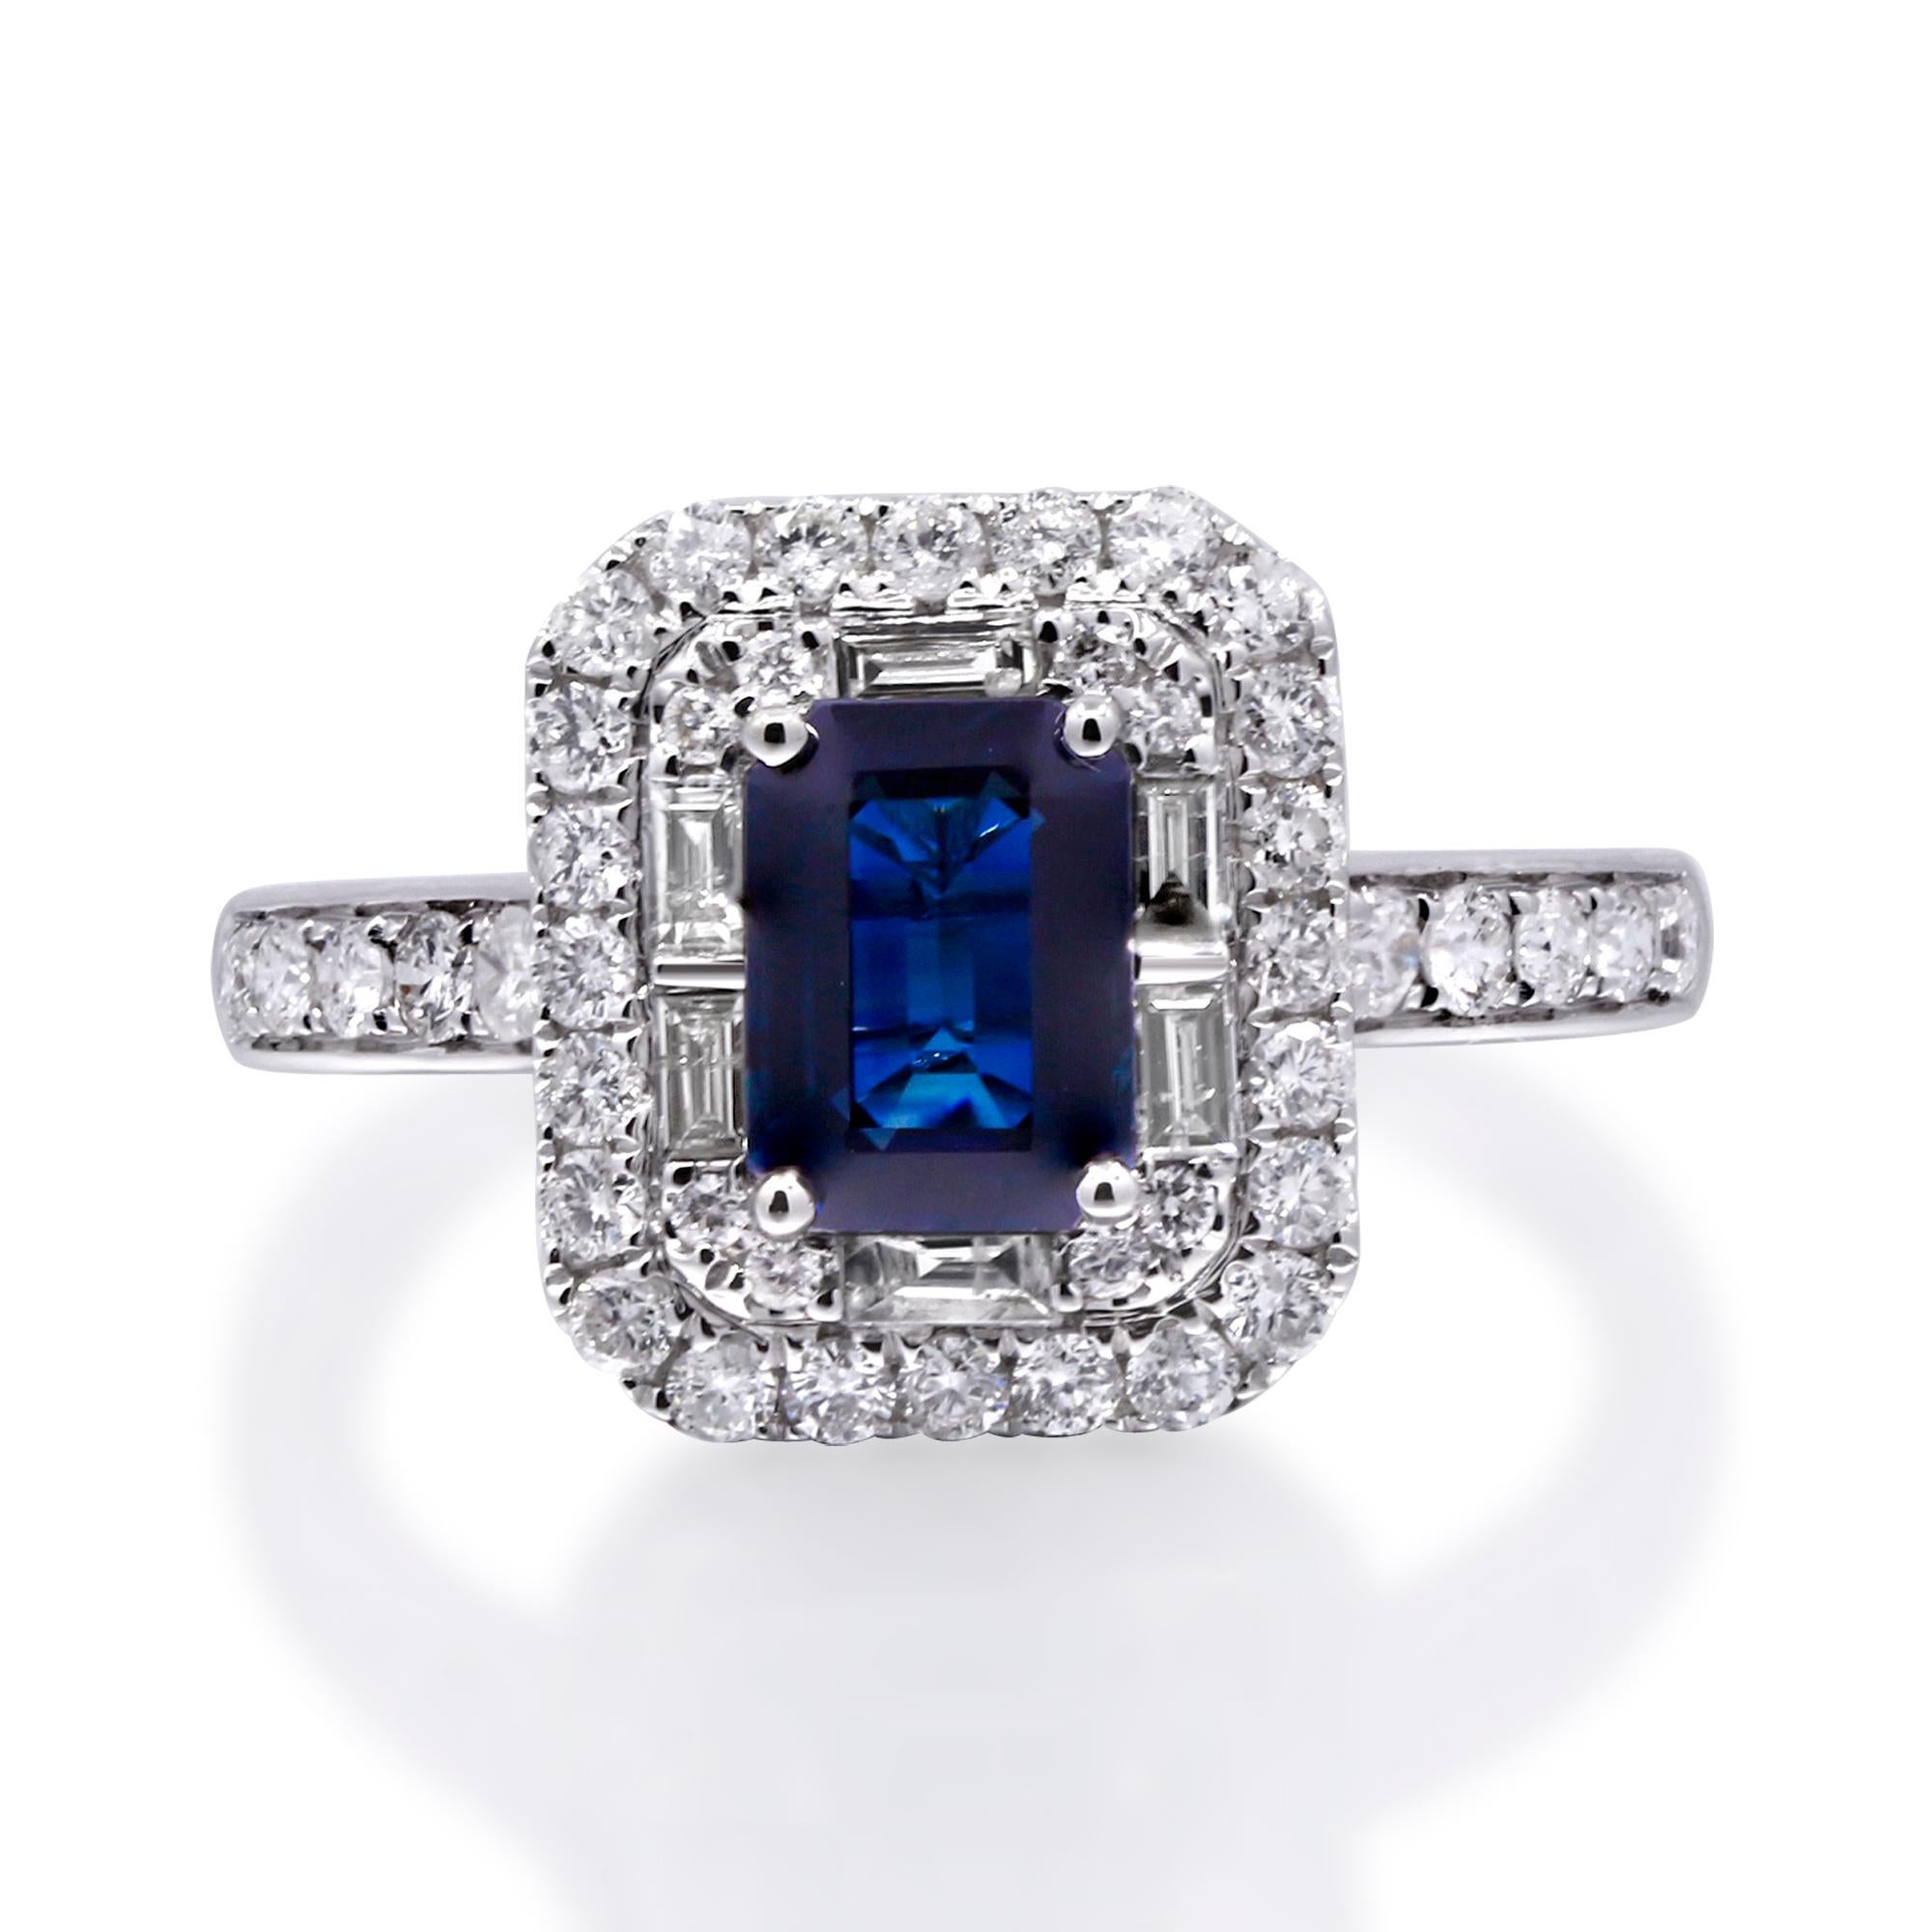 Women's or Men's 1.18 Carat Emerald-Cut Blue Sapphire with Diamond Accents 10K White Gold Ring For Sale